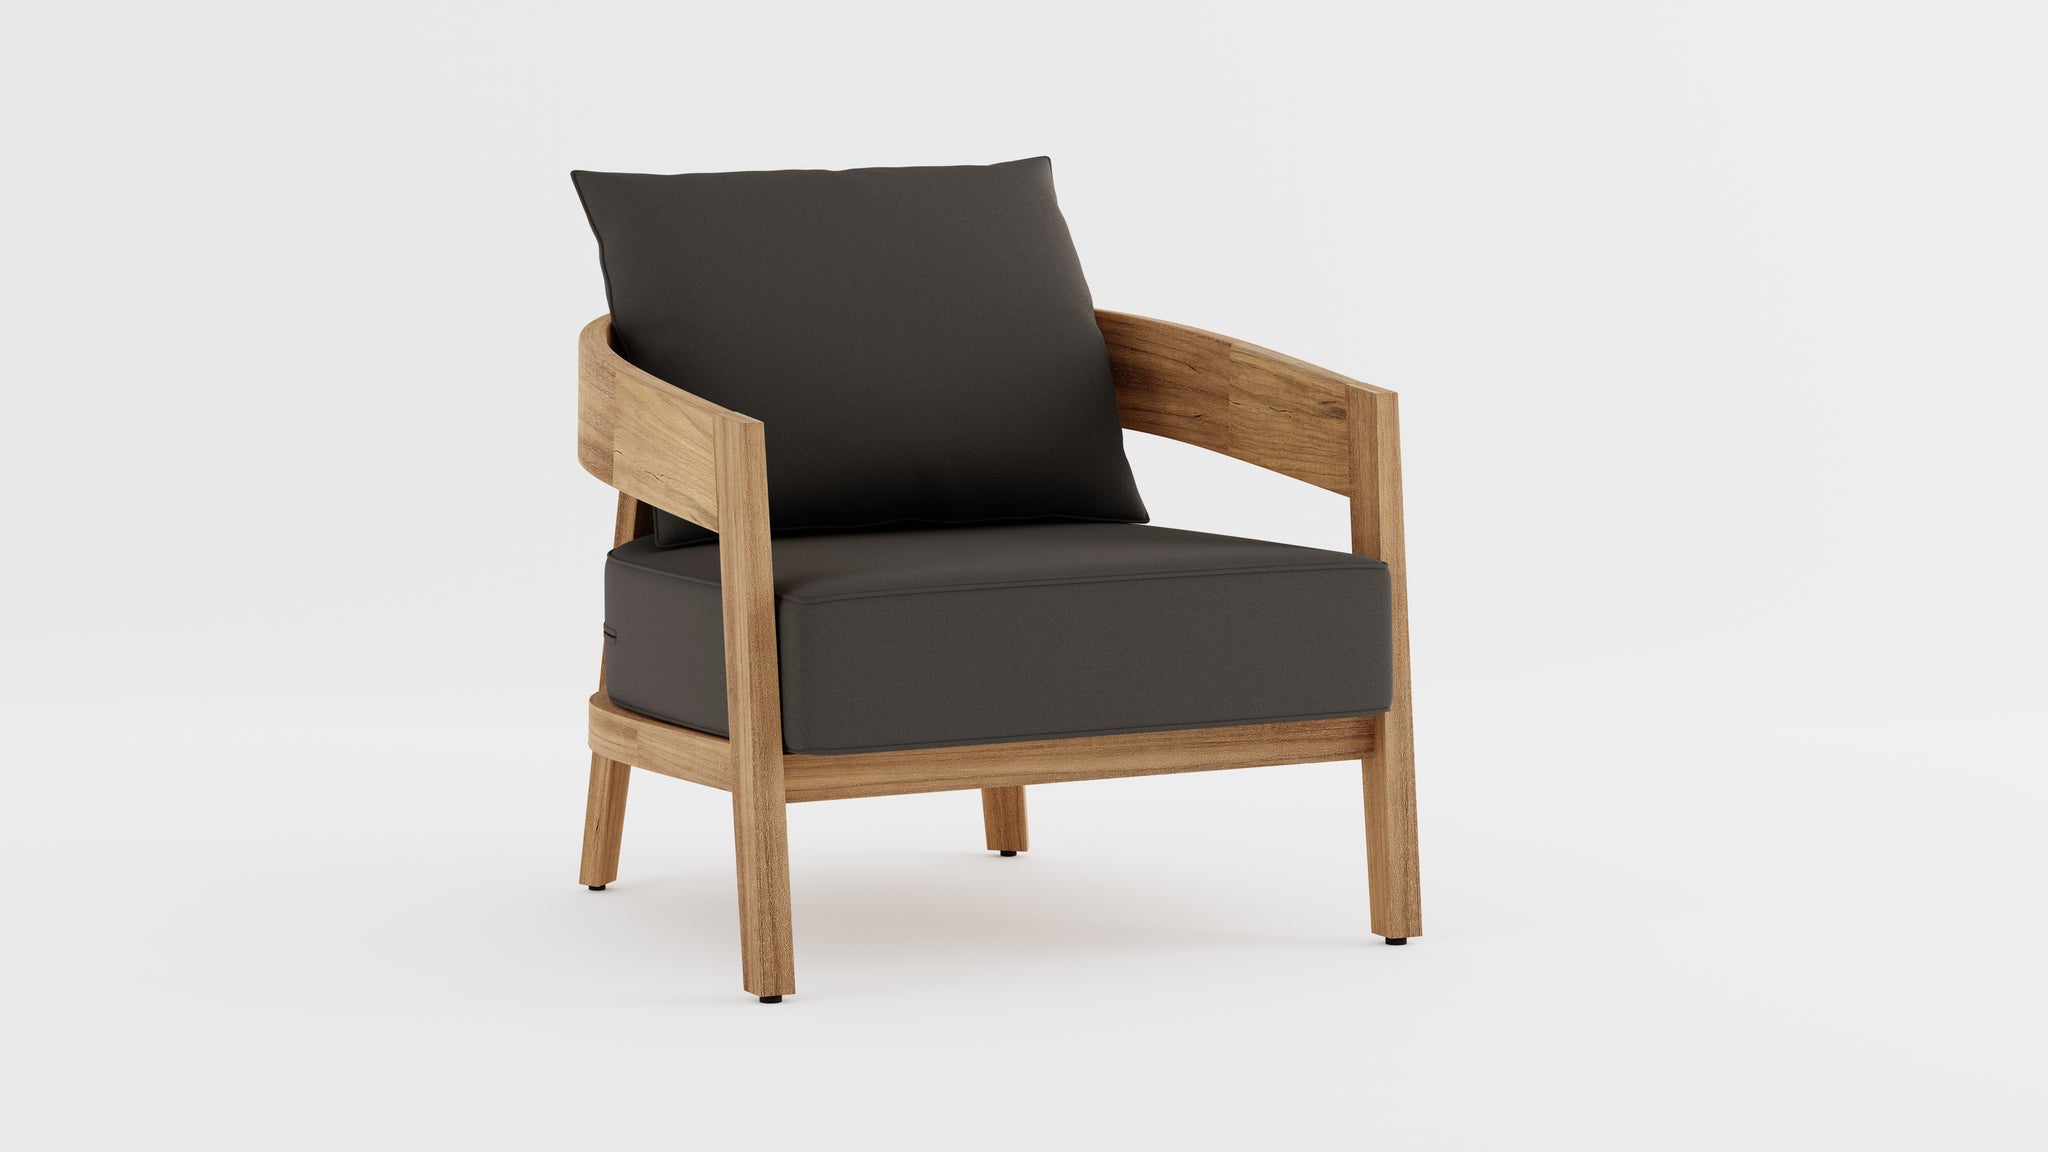 The Windsor Outdoor Teak Lounge Armchair with Graphite Cushions